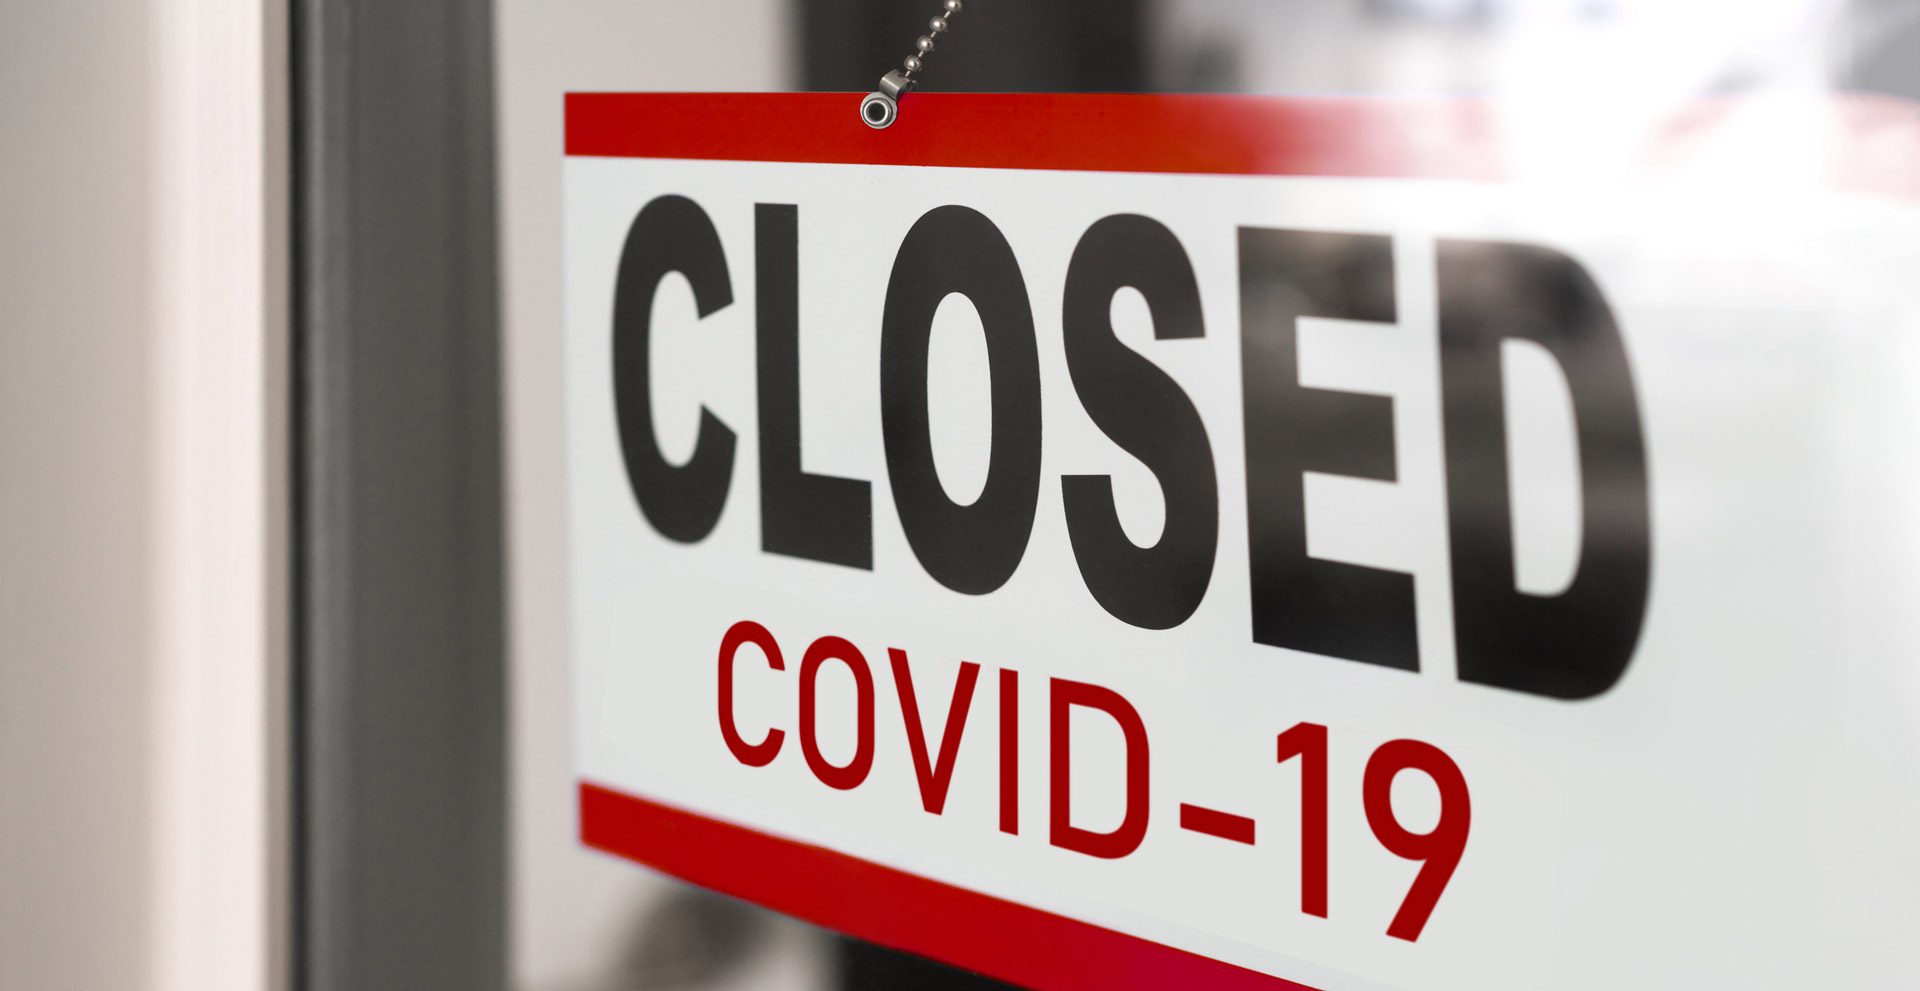 Were You Forced To Take Annual Leave During Covid-19 Lockdown?